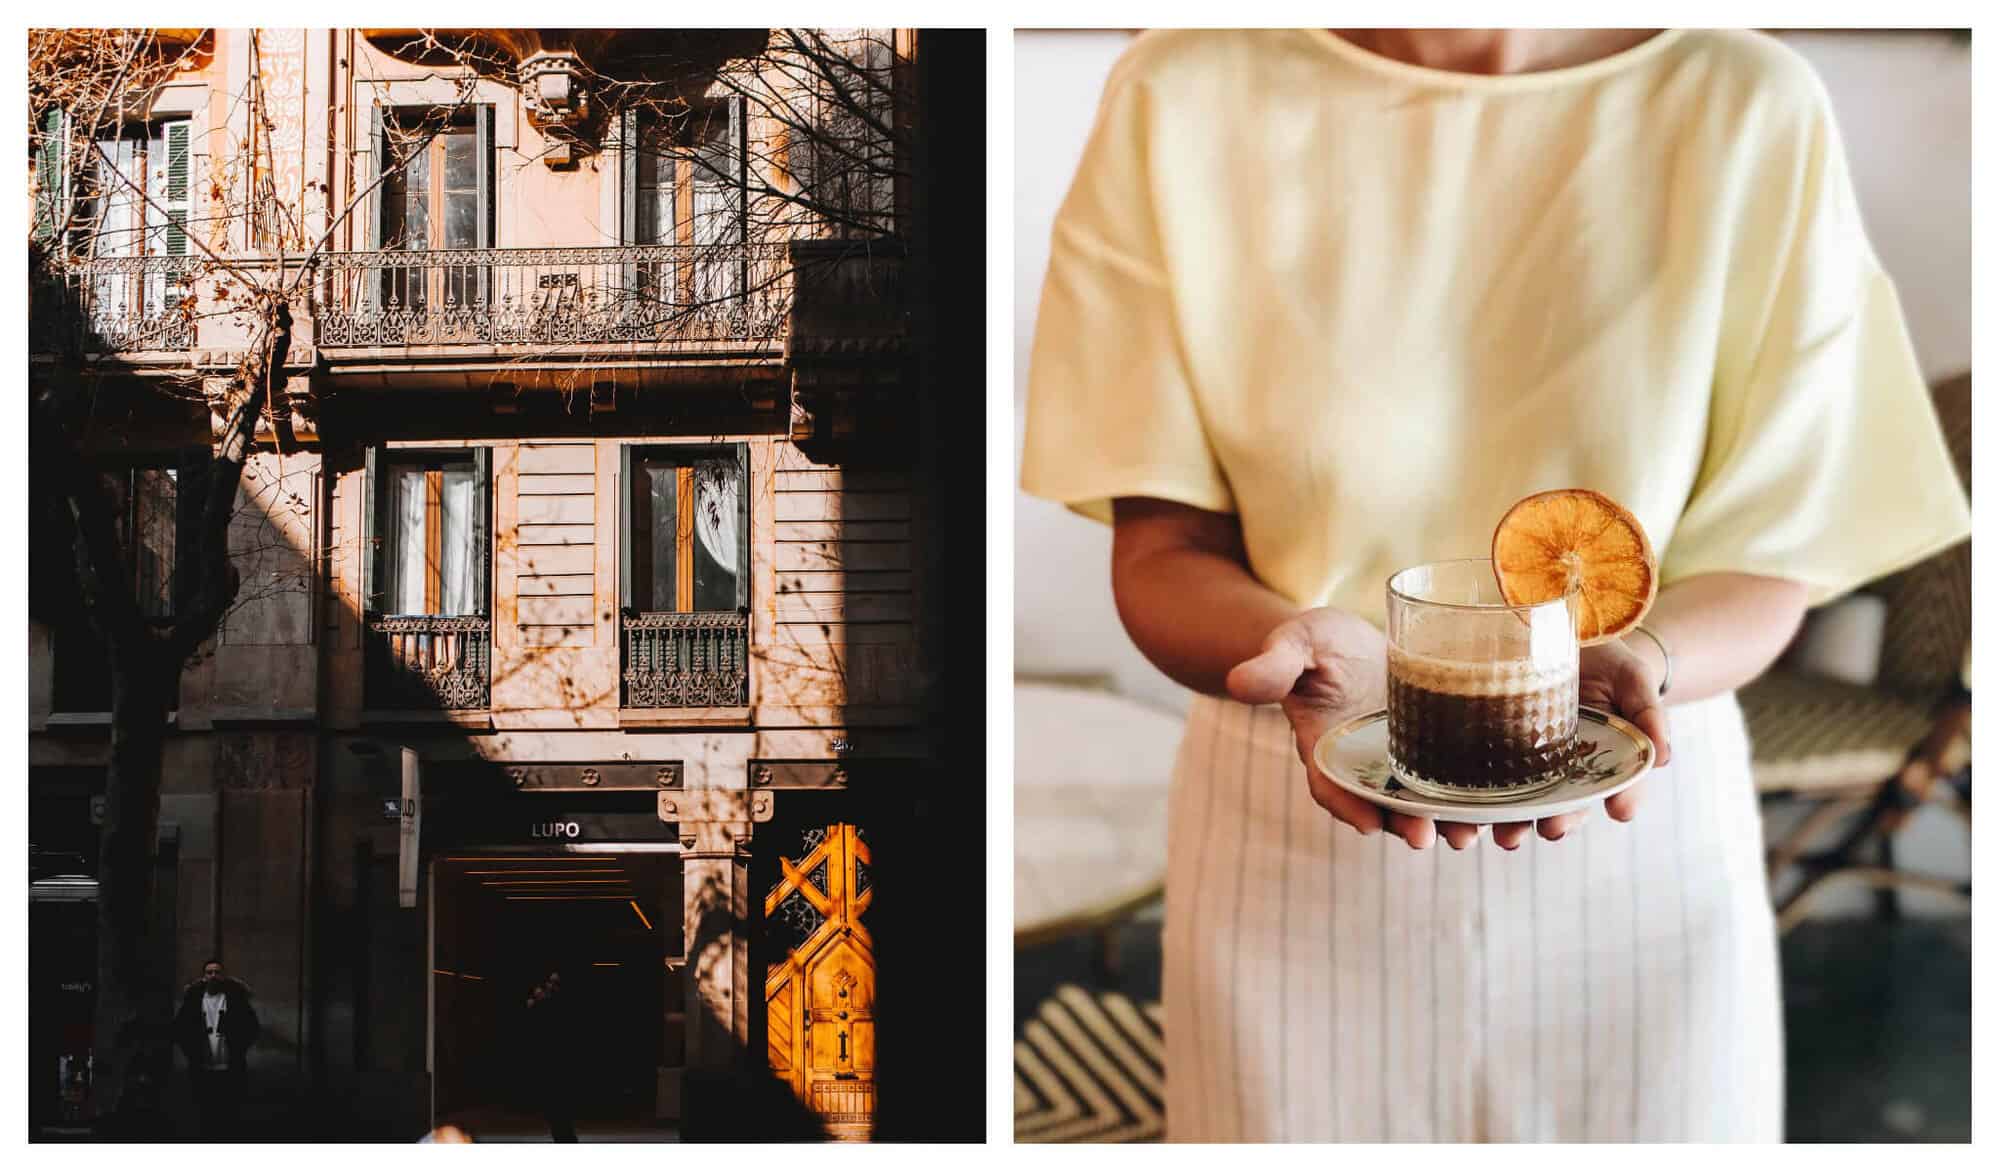 Left: A man waits in the shade in front of a building with a wooden door. Right: A woman in a yellow shirt hands a coffee garnished with an orange.